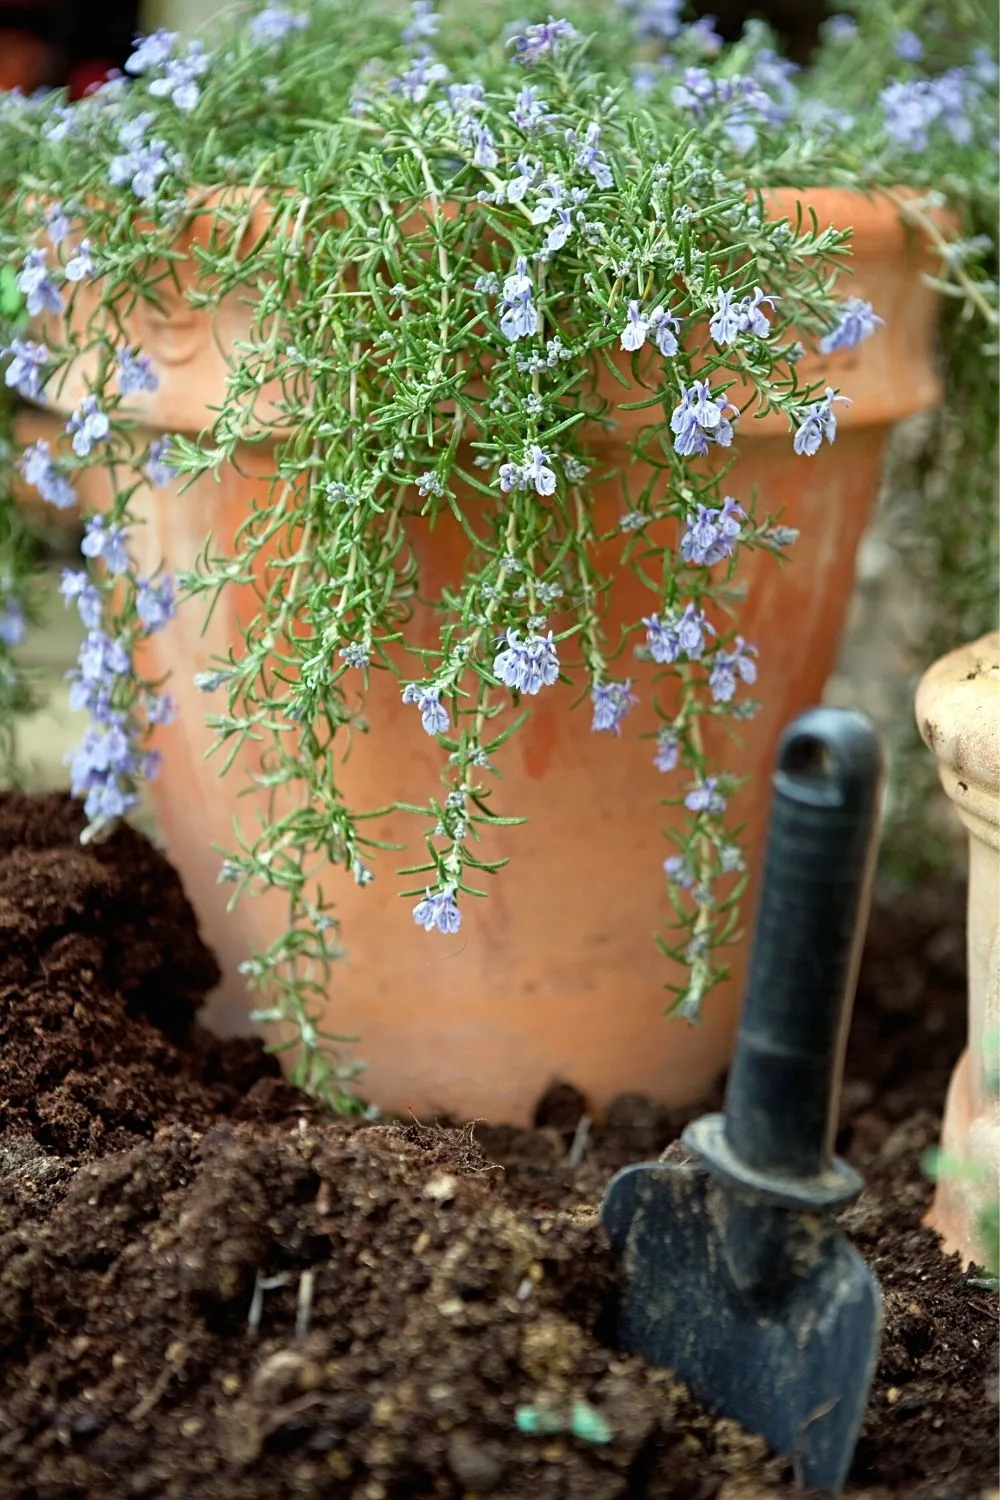 Rosemary is another widely used herb that you can grow easily in pots on east-facing balconies